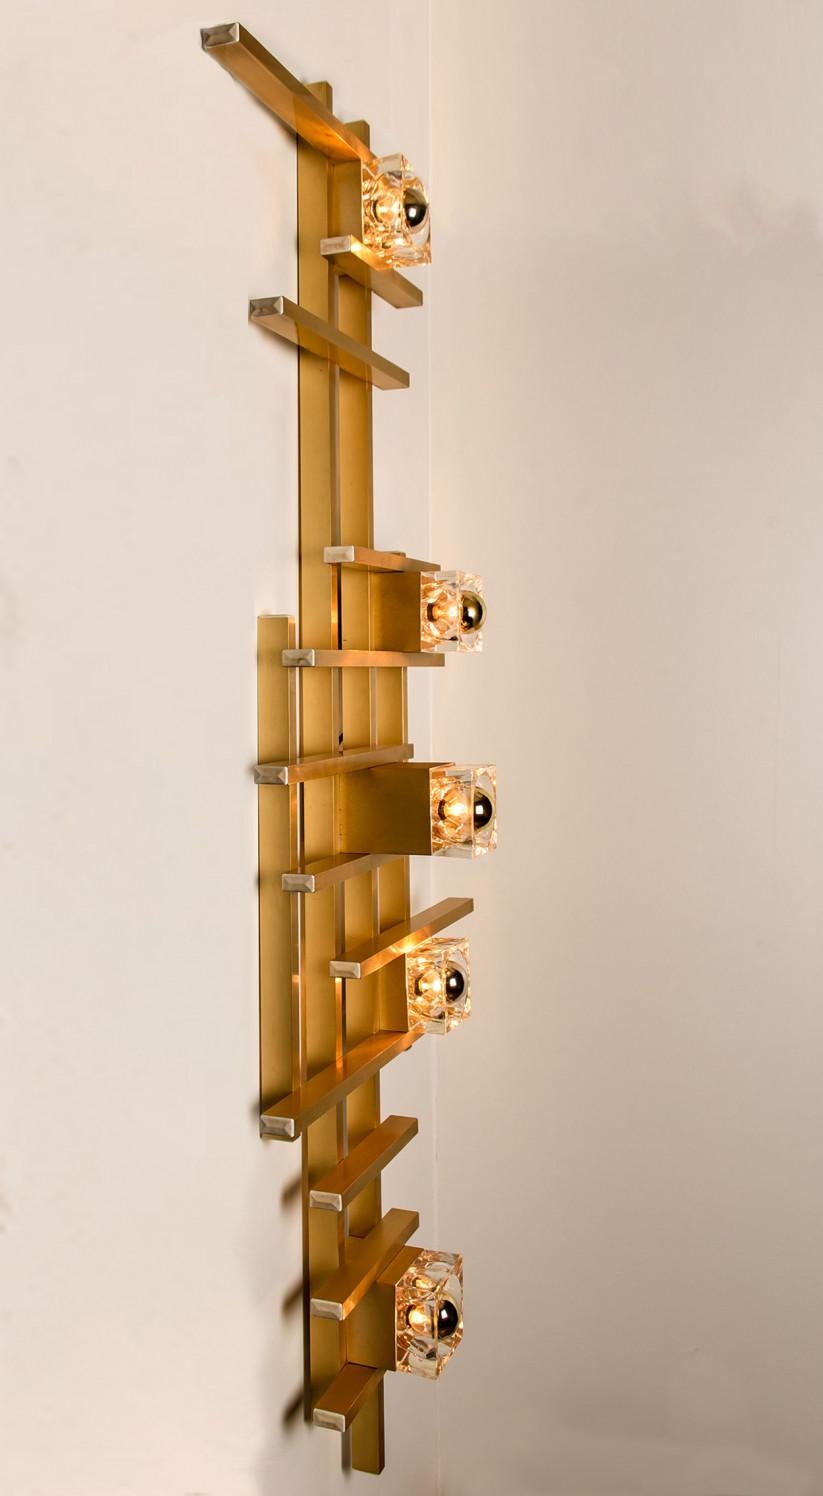 Italian Large Geometric Sculptural Brass Wall Sconce by Sciolari, 1970s For Sale